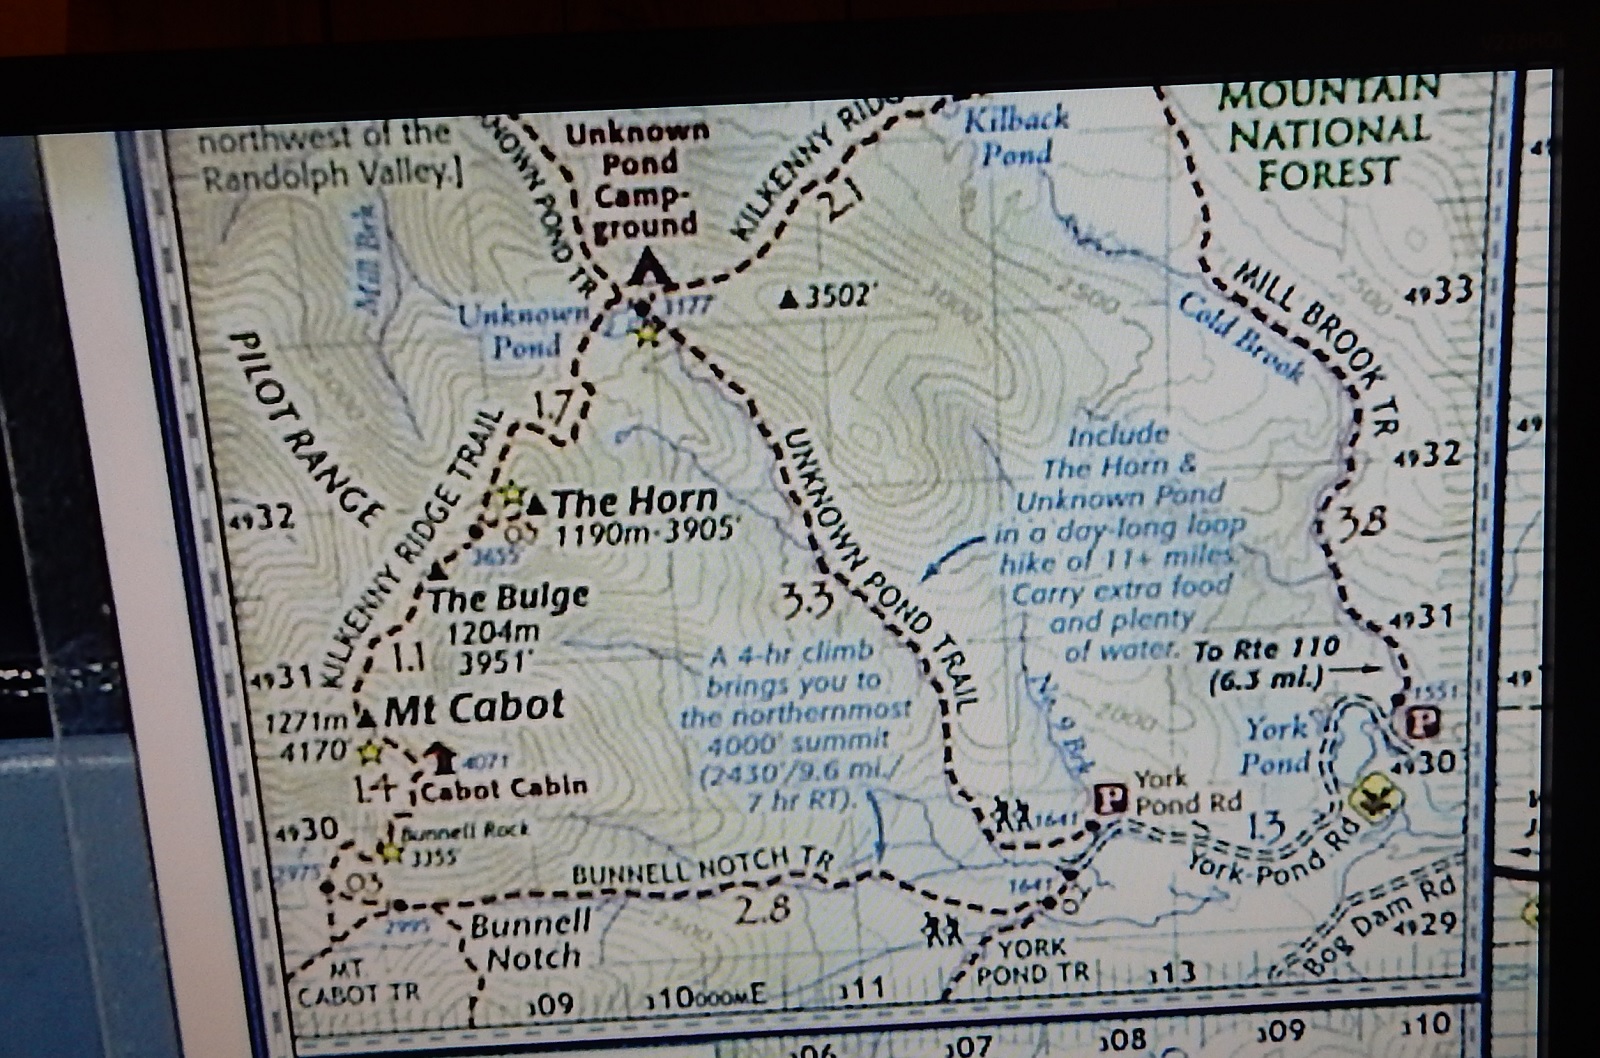 05-25 08;20 Map of Mt Cabot